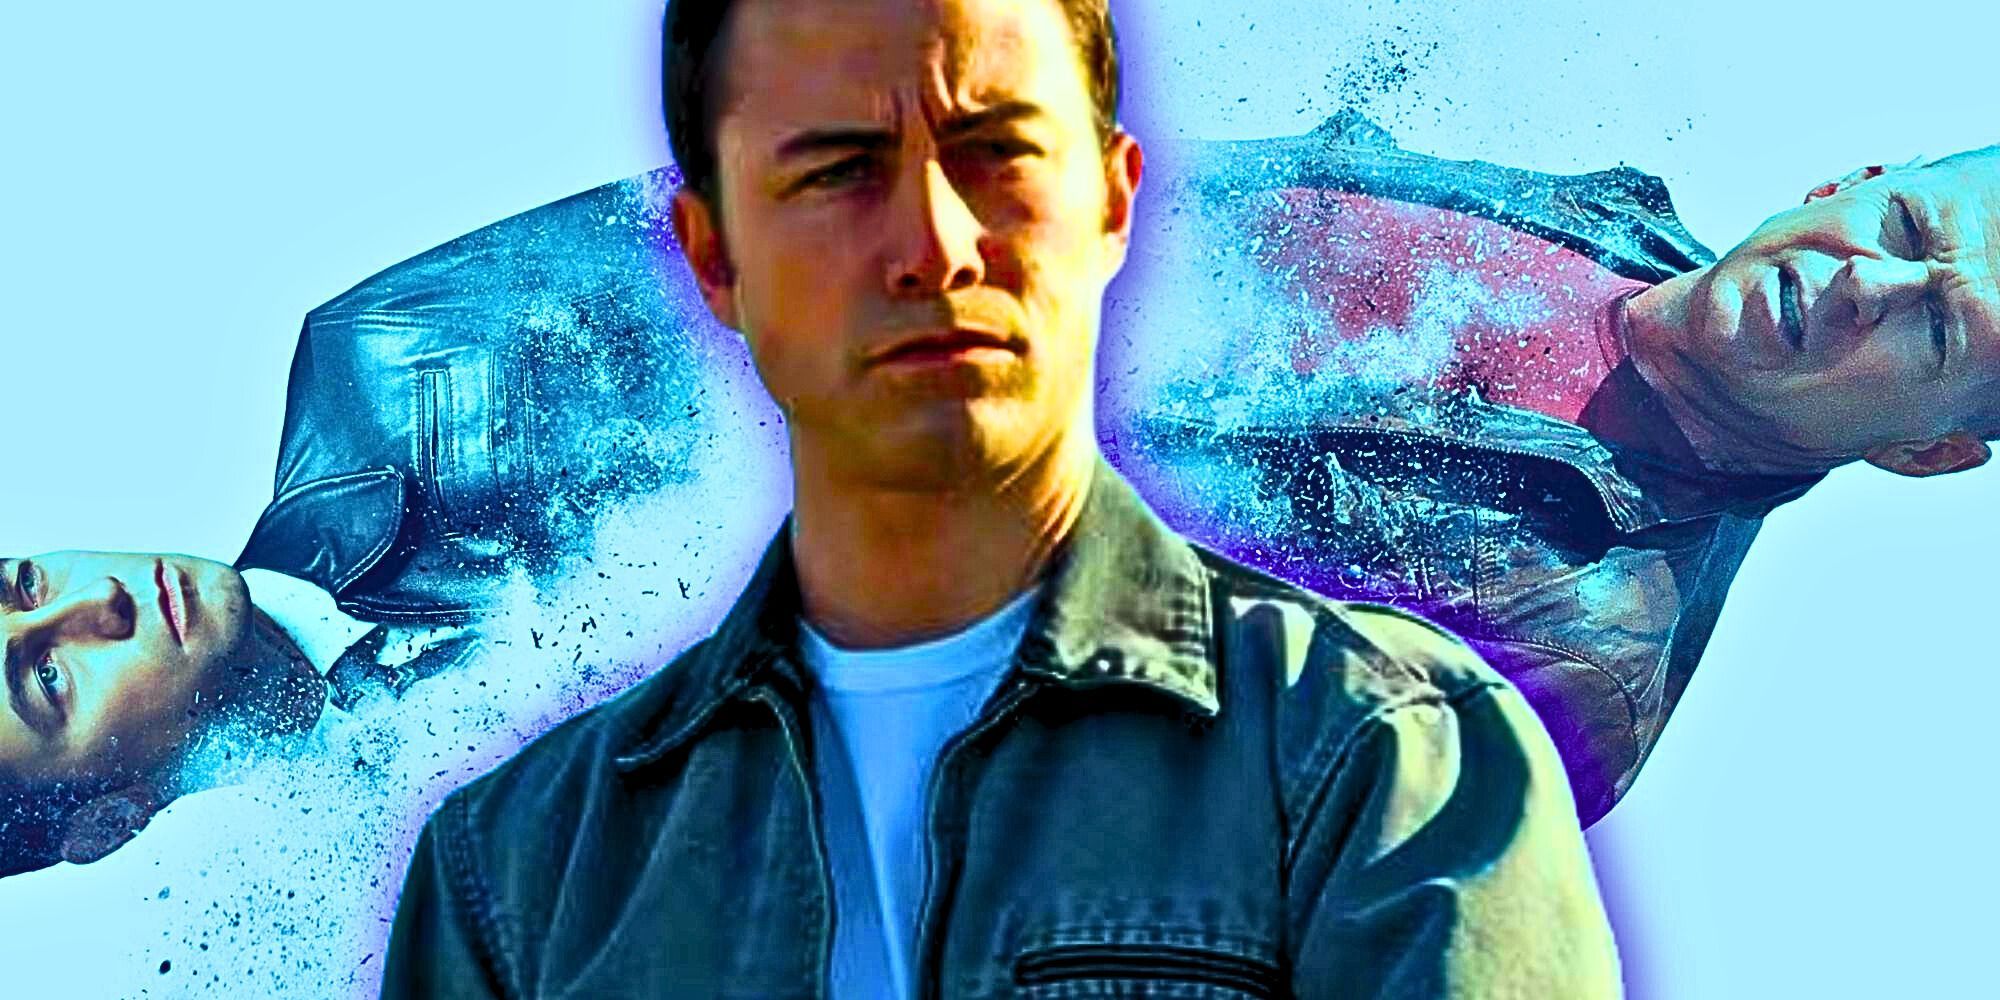 A custom image of Jason Gordon-Levitt as Young Joe in the background of the Looper poster